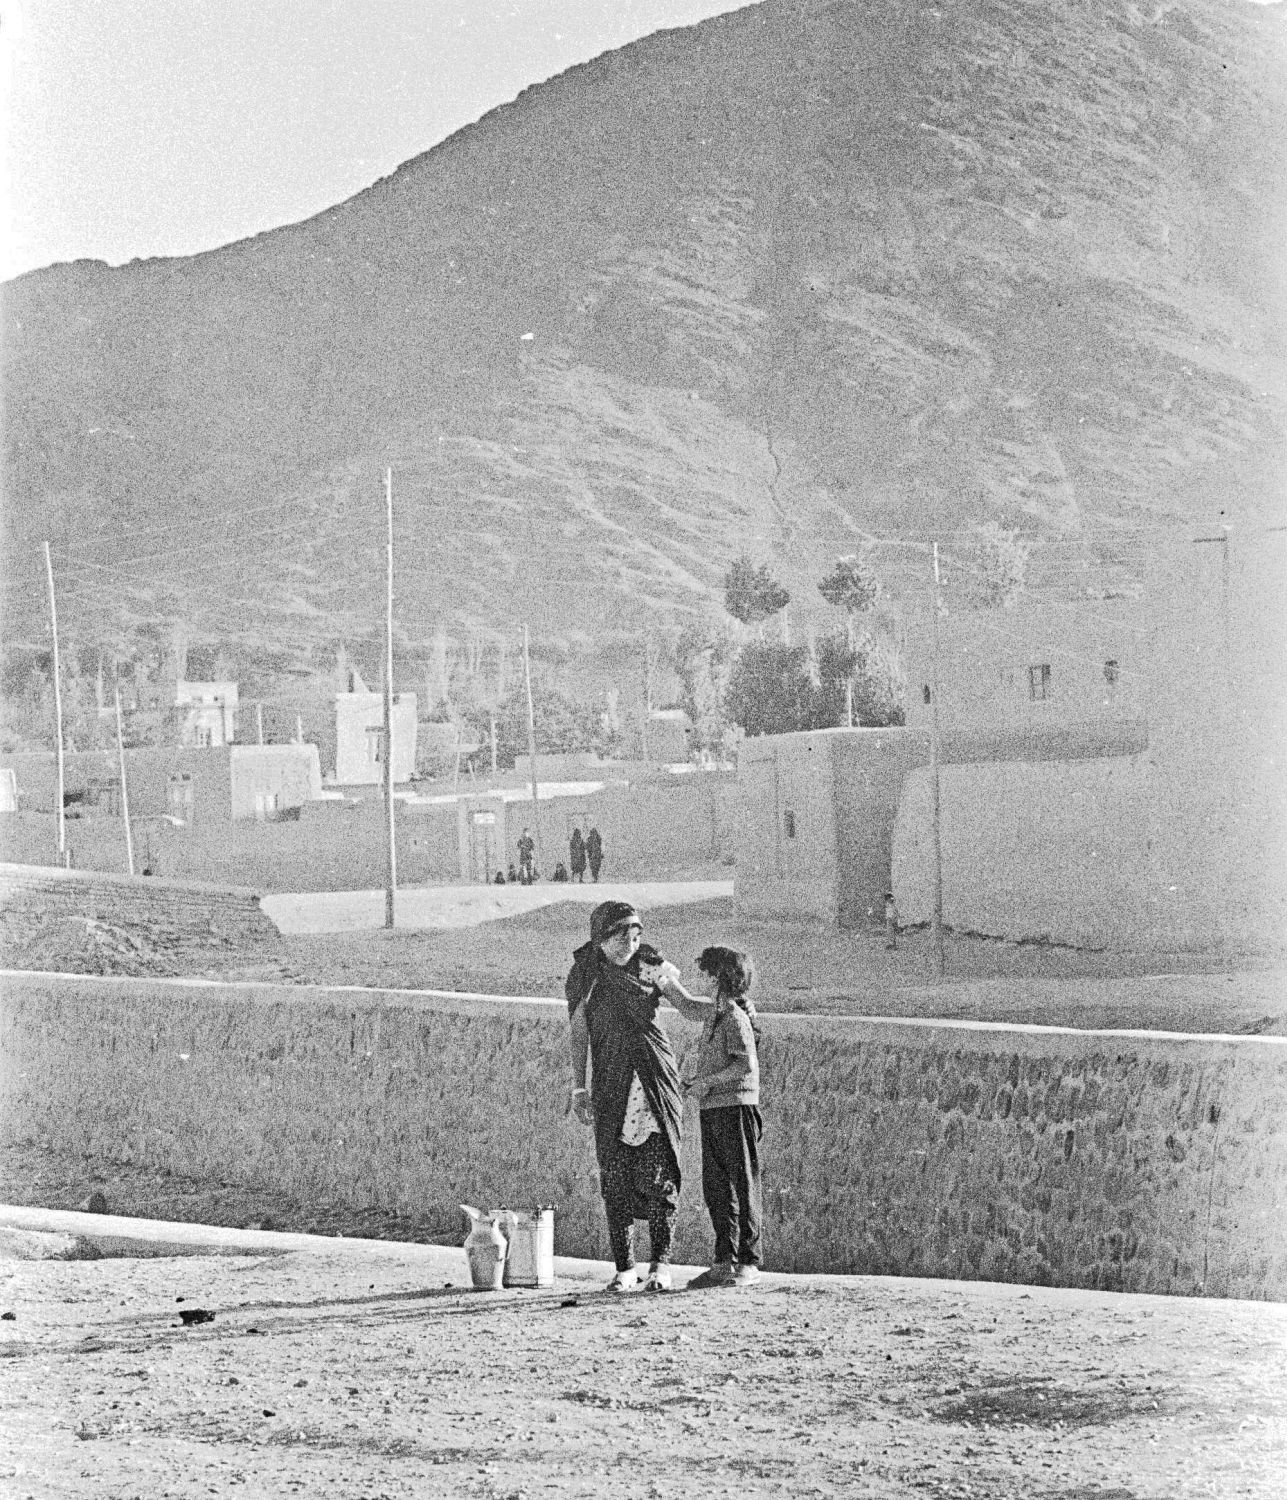 Arak  - View of two young people in Arak, Iran. Village visible in background.